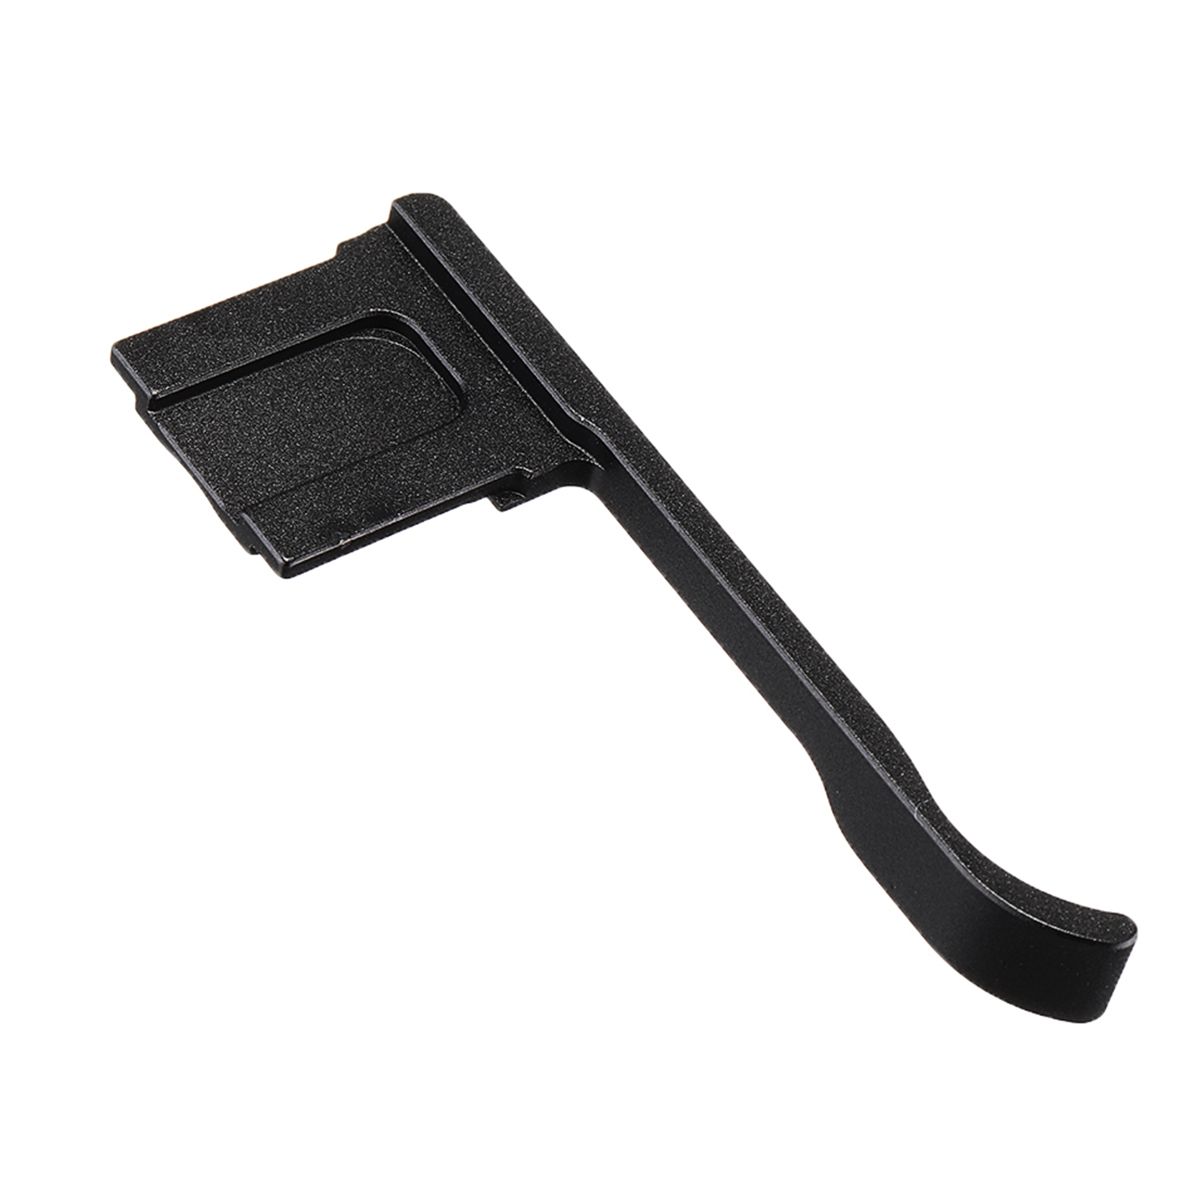 Thumb-Rest-Grip-Thumb-Up-Hot-Shoe-Cover-For-RICOH-GR3-GRIII-Mirrorless-Camera-1584134